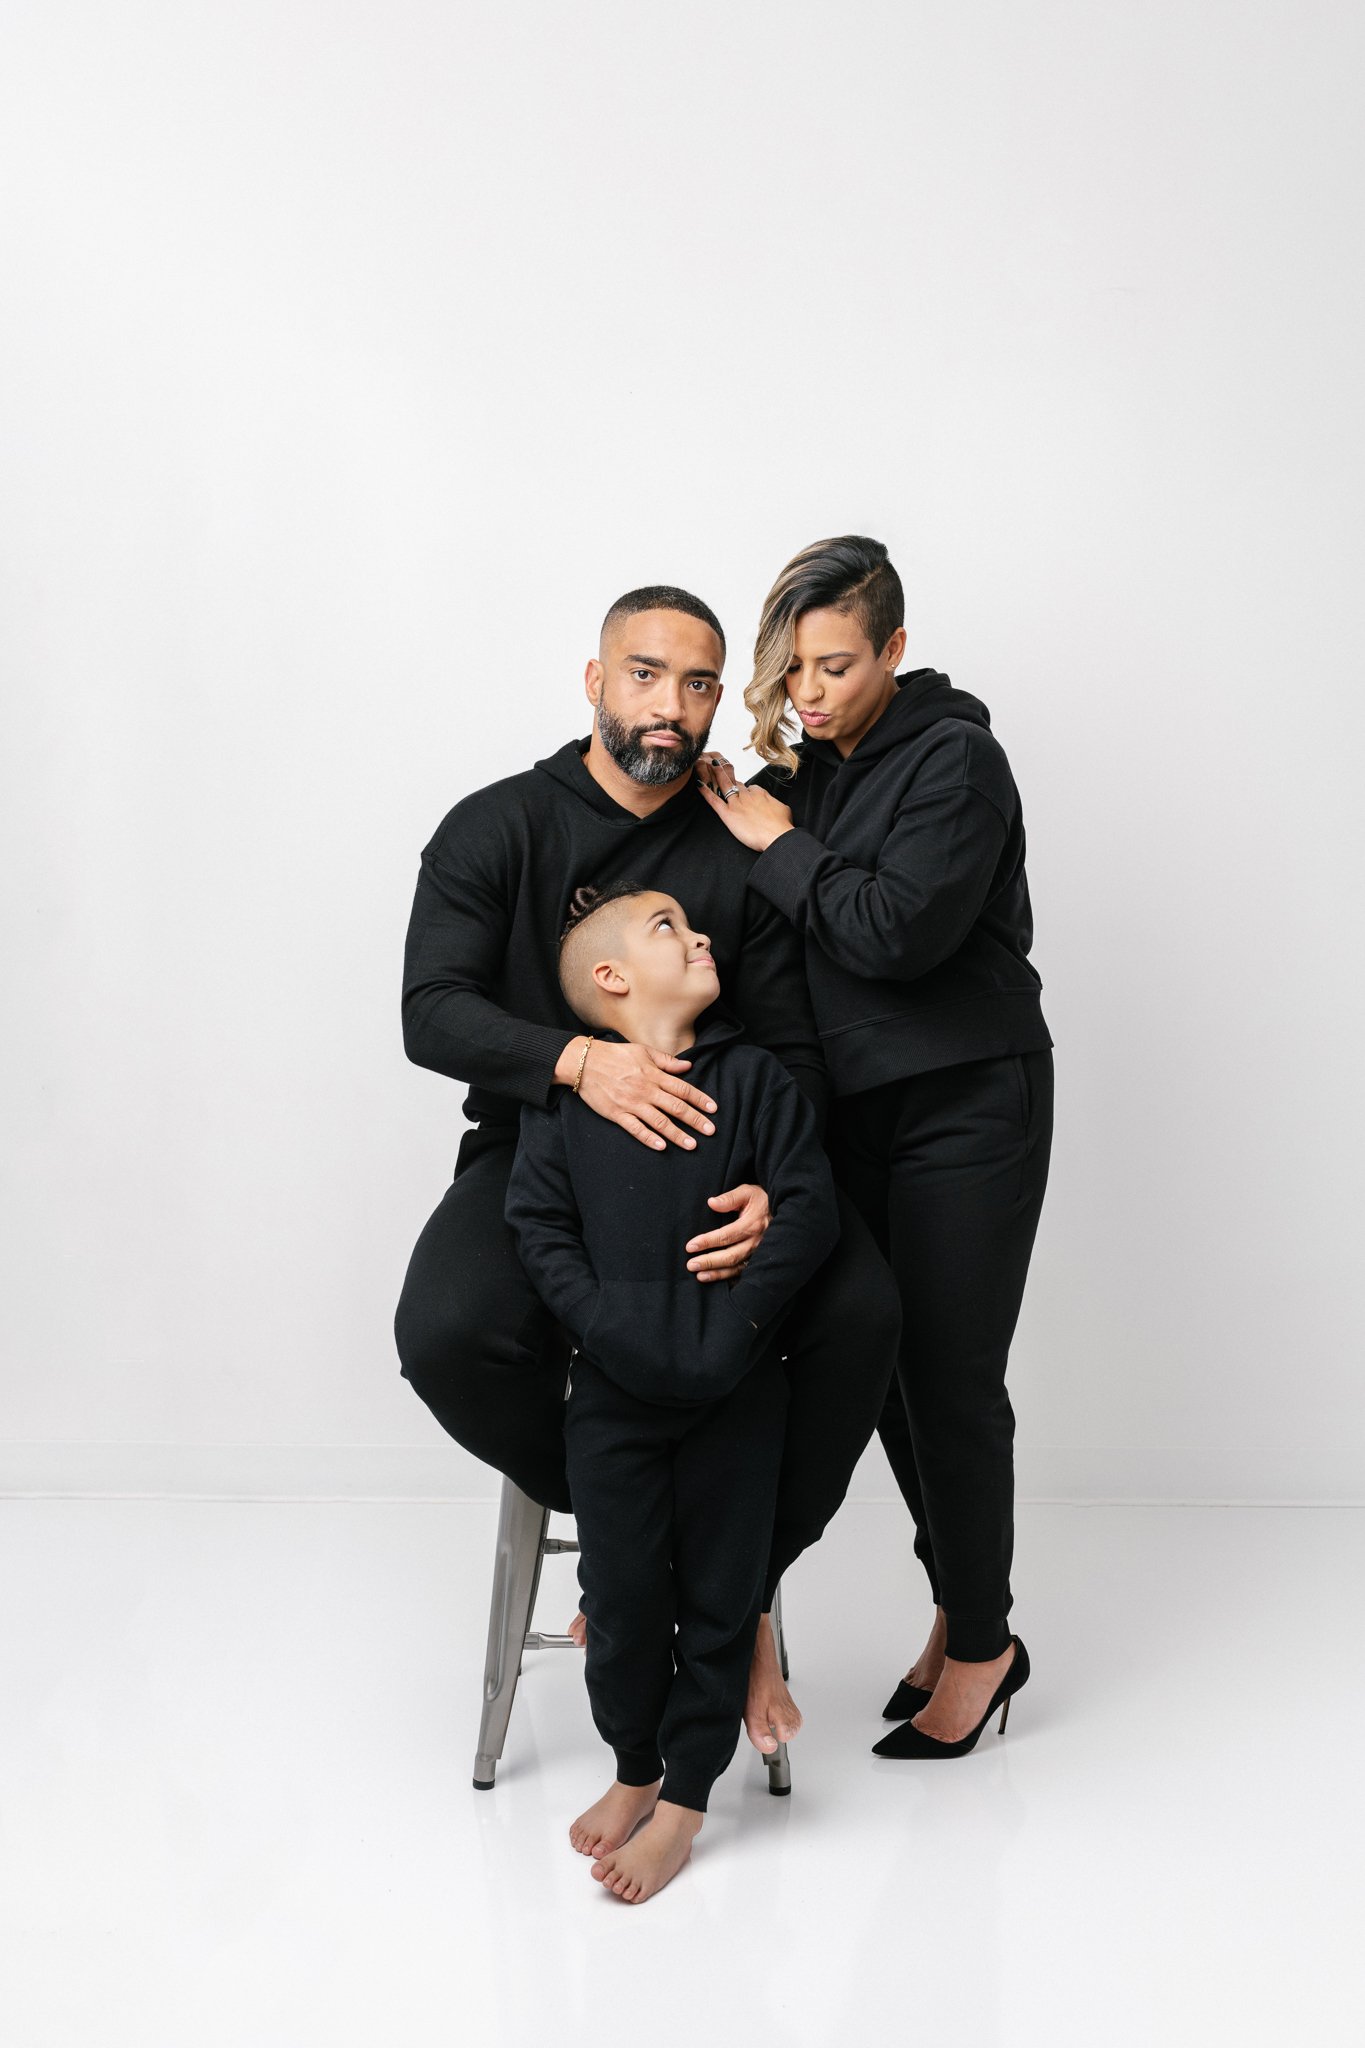  Candid studio portrait with a white background and black attire by Nicole Hawkins Photography. candid photos #NicoleHawkinsPhotograaphy #NicoleHawkinsFamilies #Modernfamilypictures #studioportraits #matchingfamilyoutfits #NJphotographer 